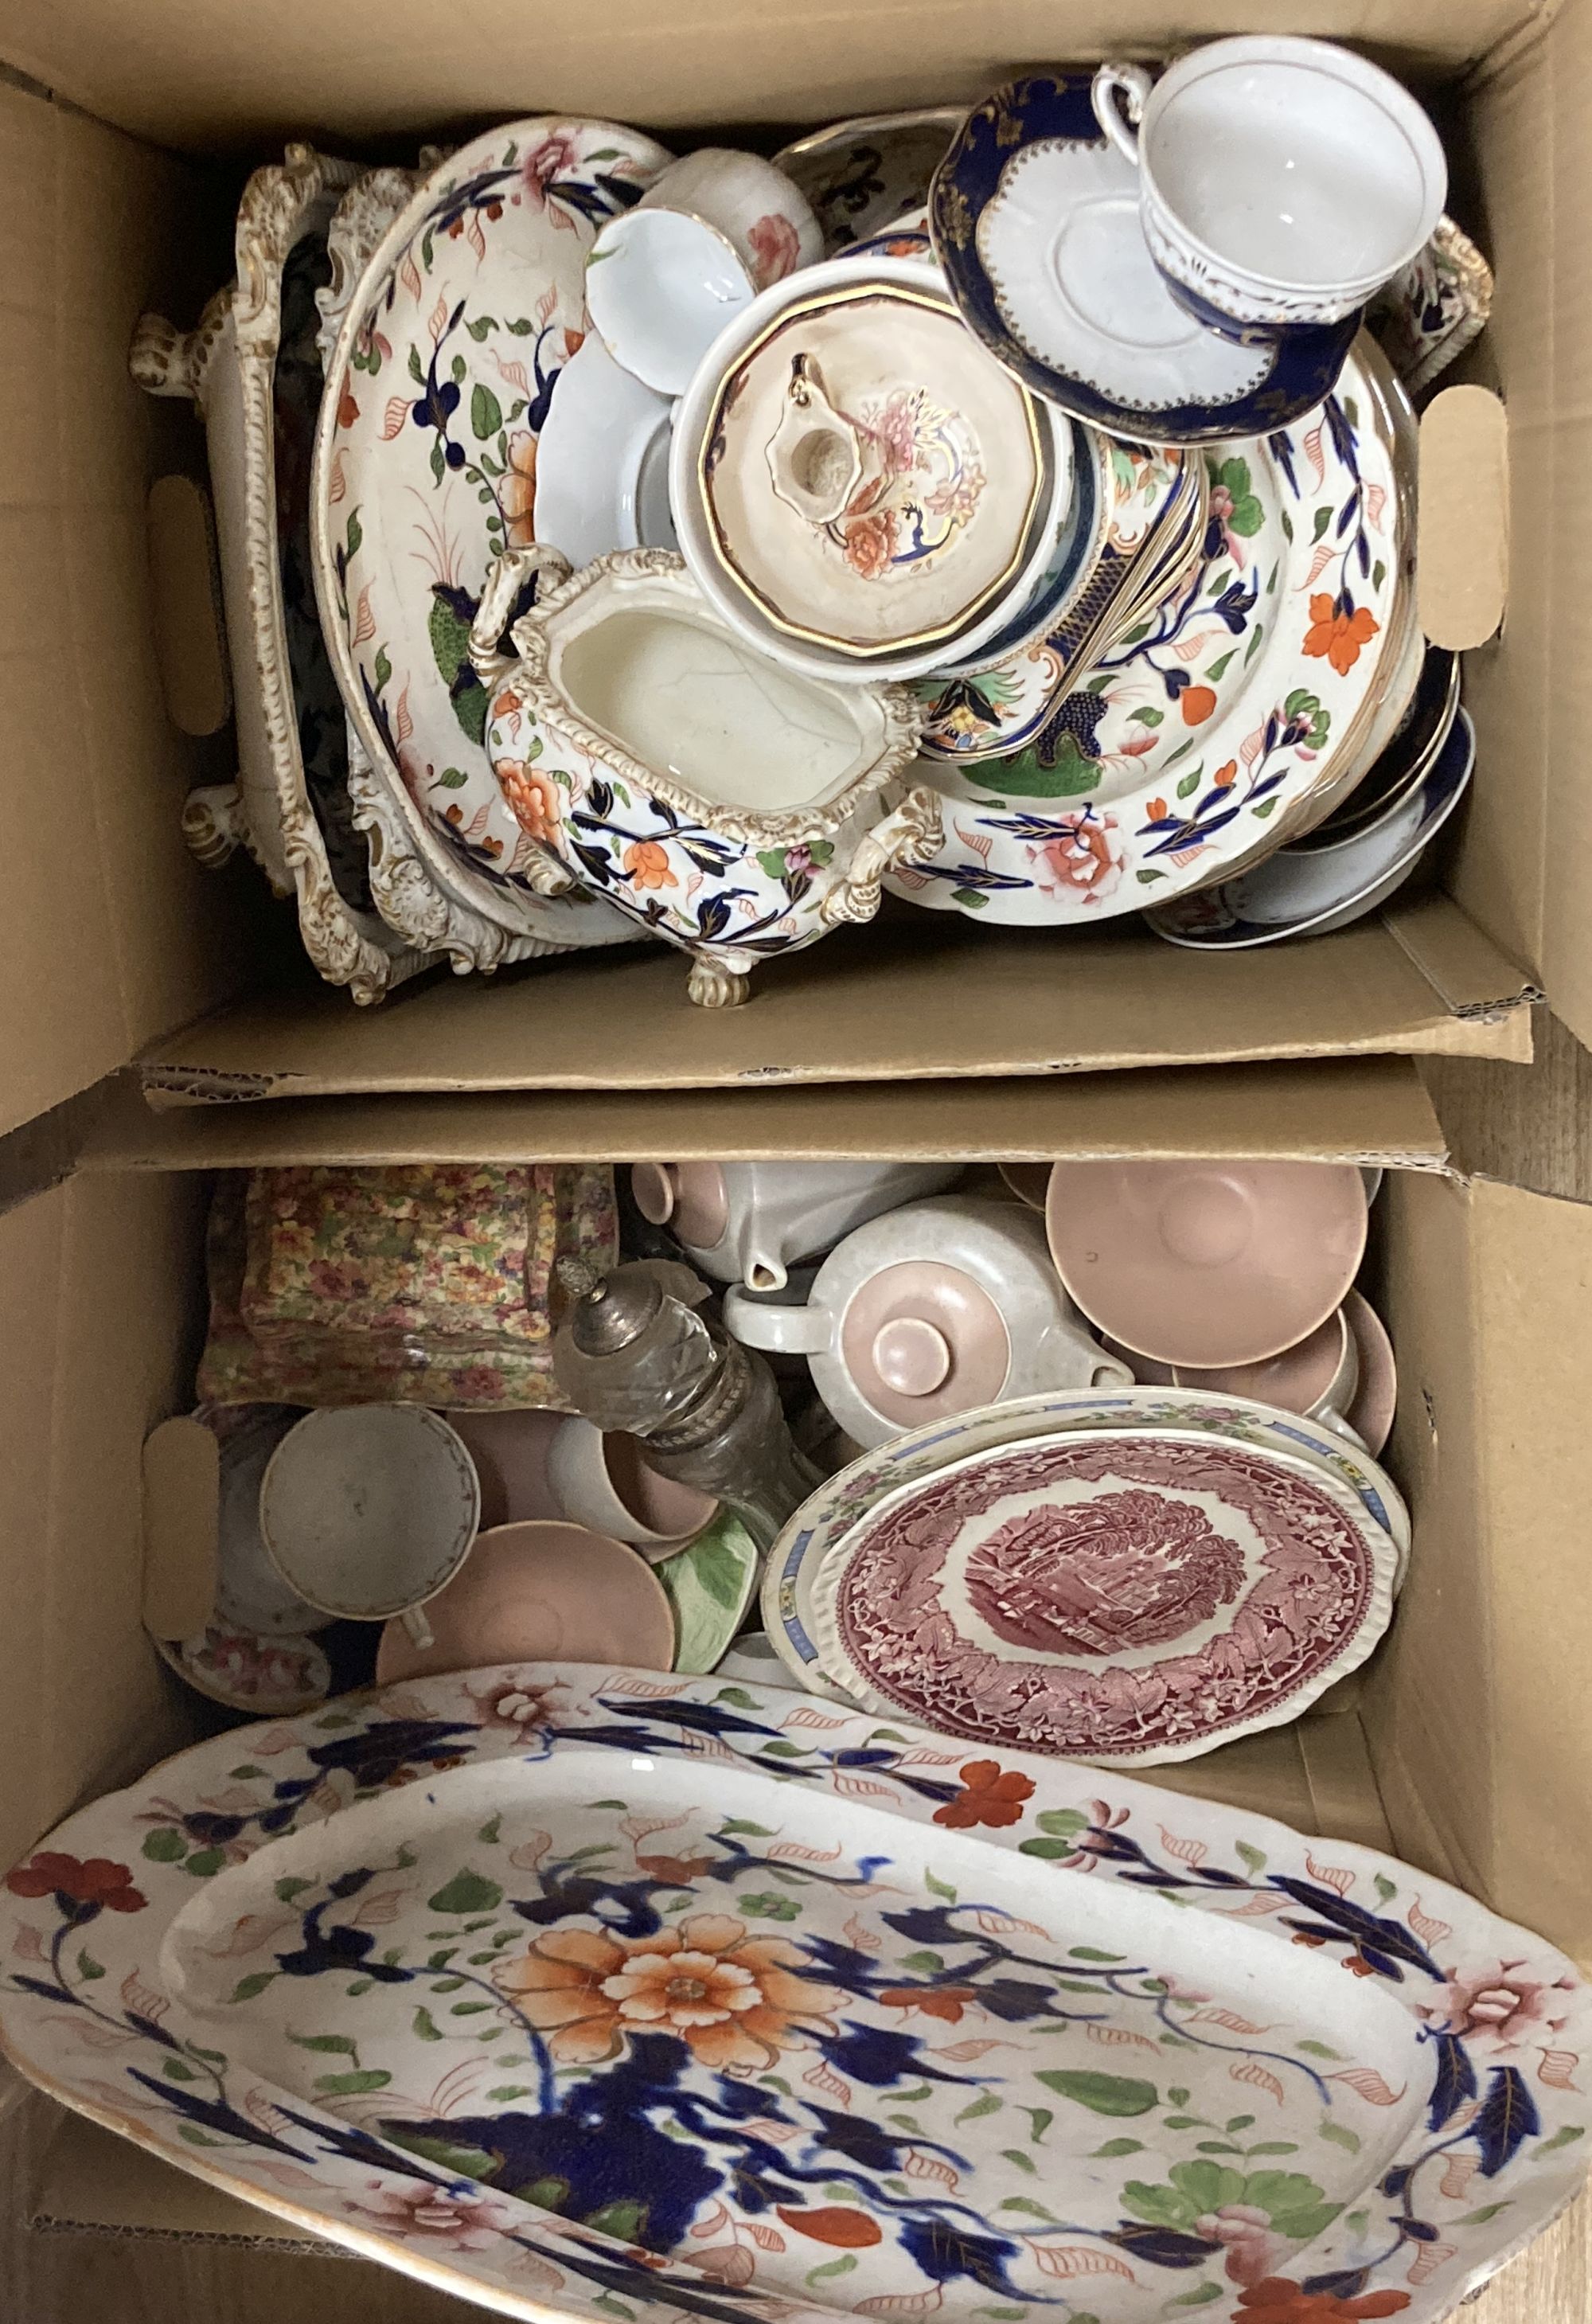 An early 19th century Staffordshire pottery part dinner service, including a large meat dish